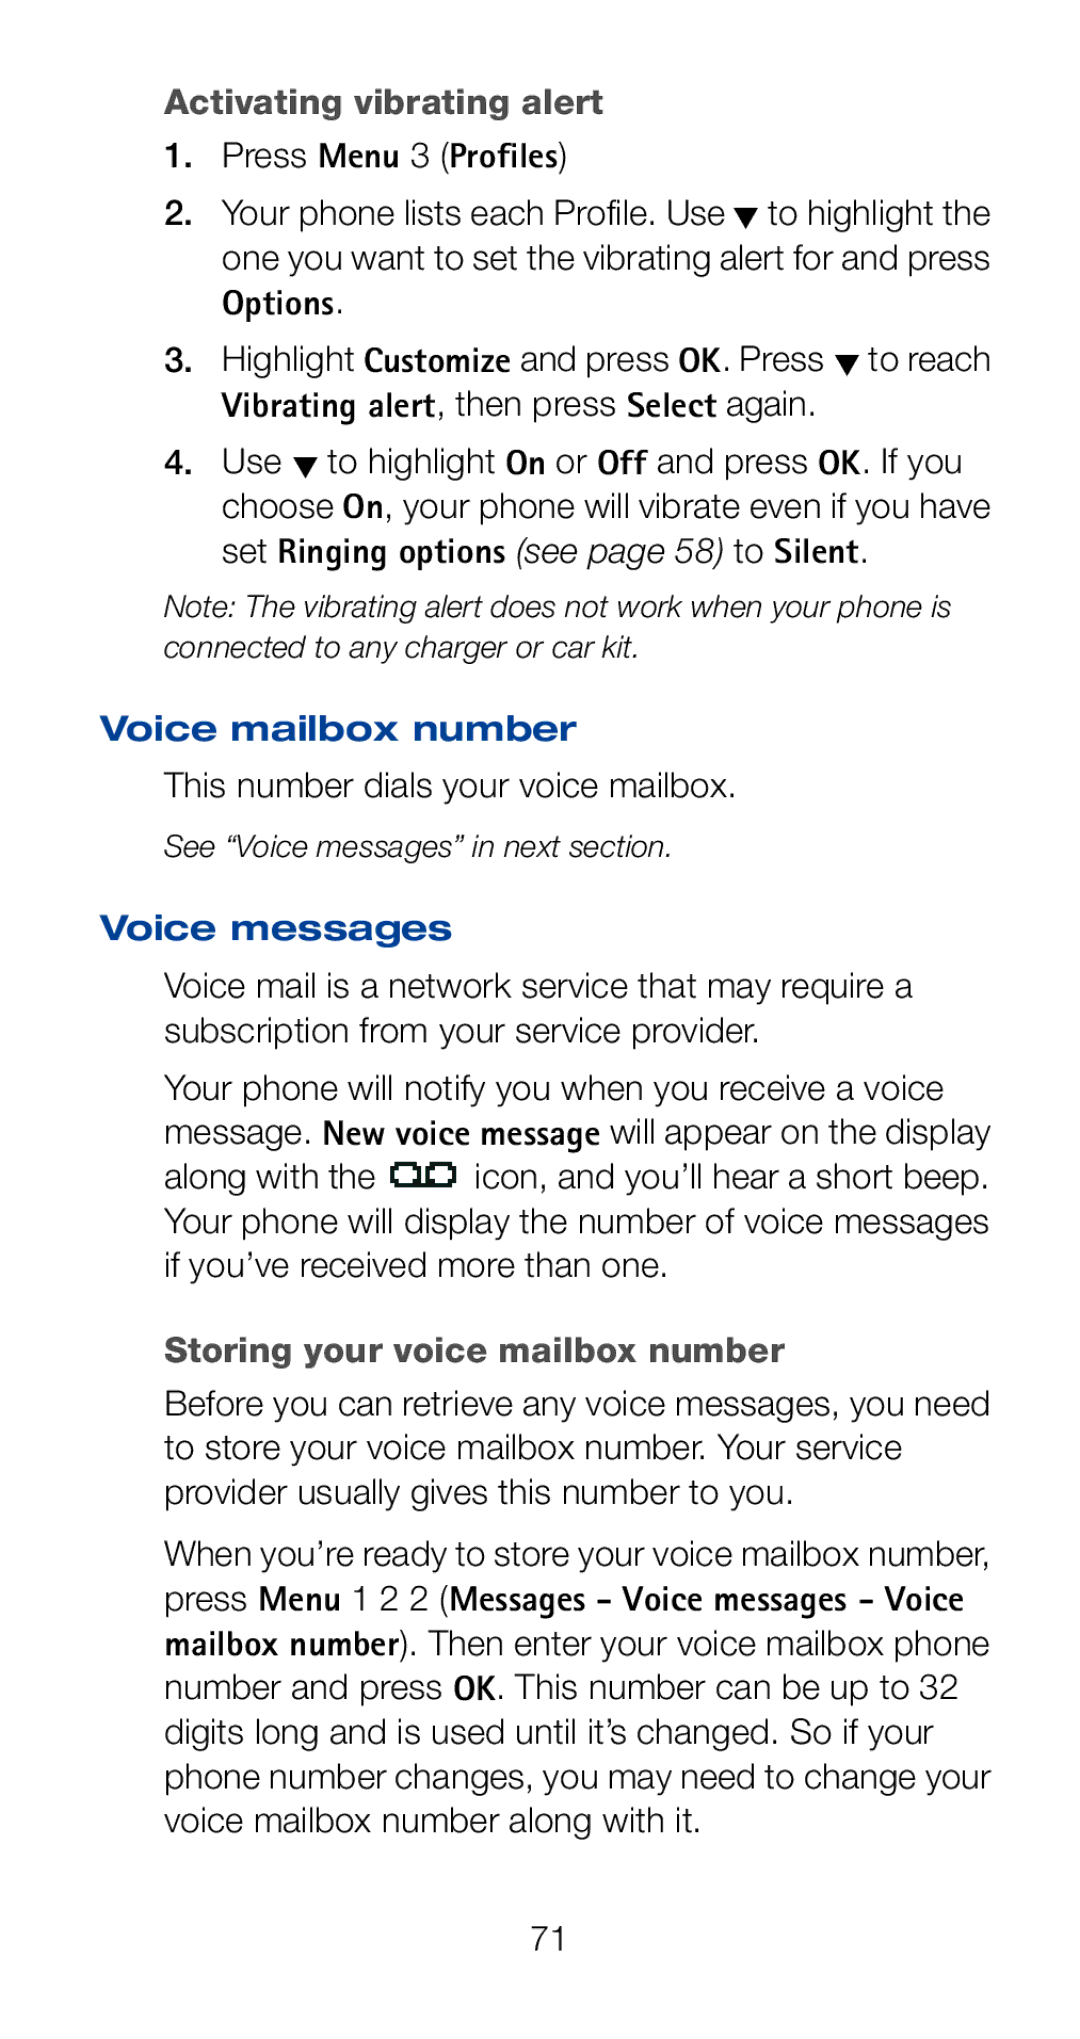 Nokia 6161i Activating vibrating alert, Voice mailbox number, This number dials your voice mailbox, Voice messages 